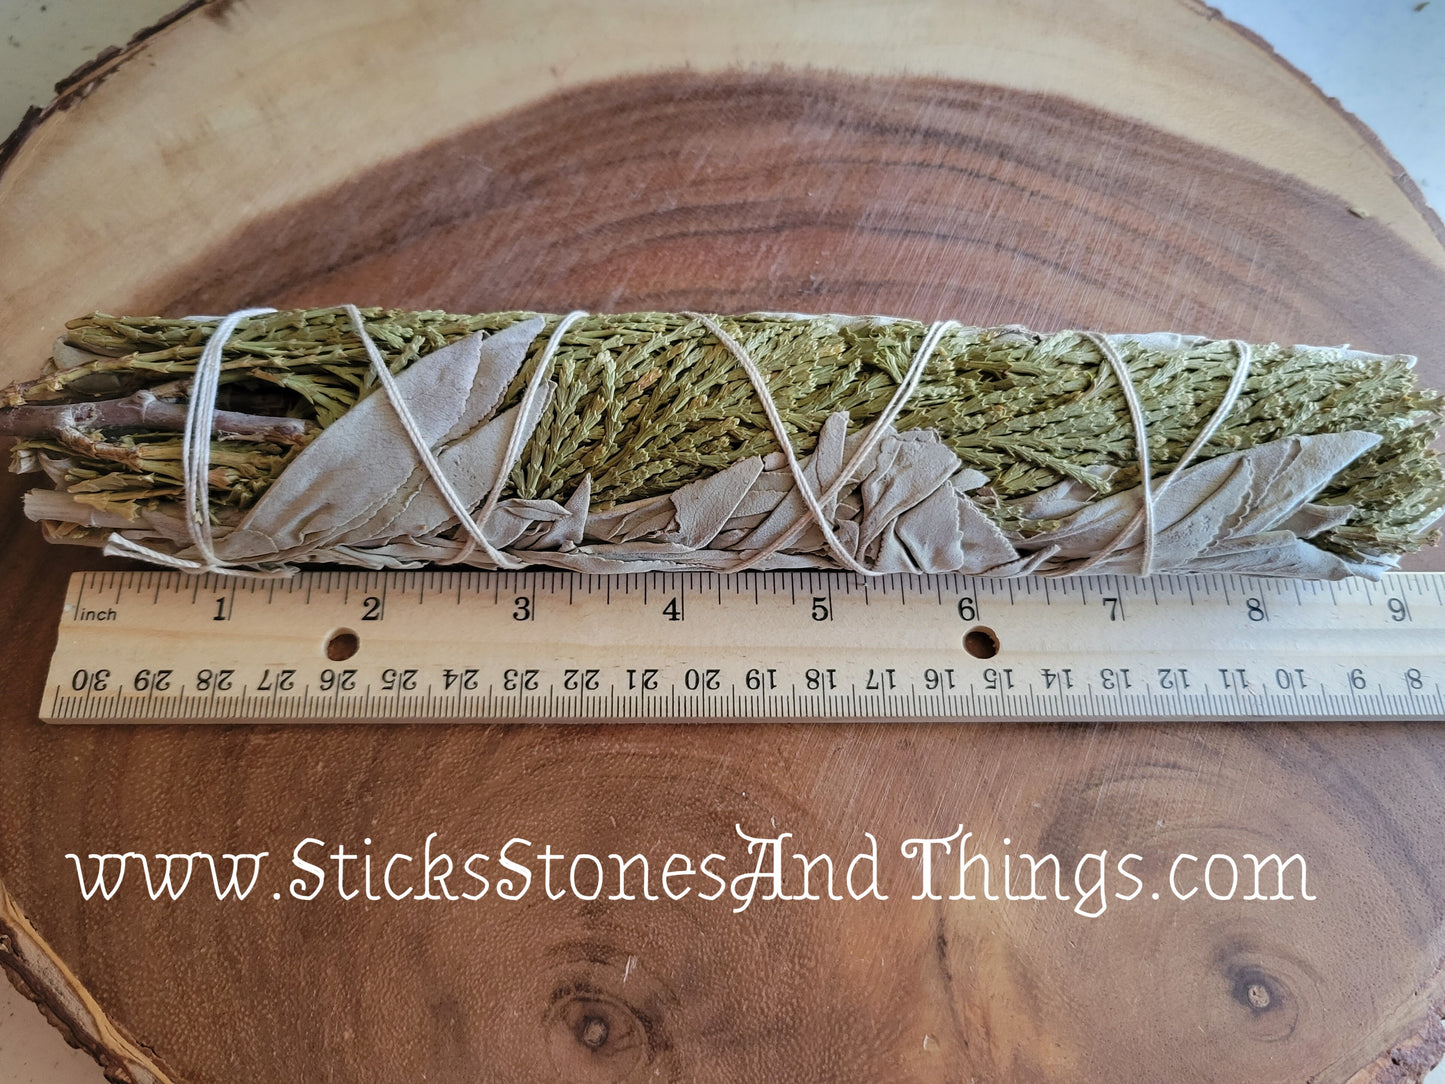 White Sage with Cedar Smudge Stick 9-10 inches